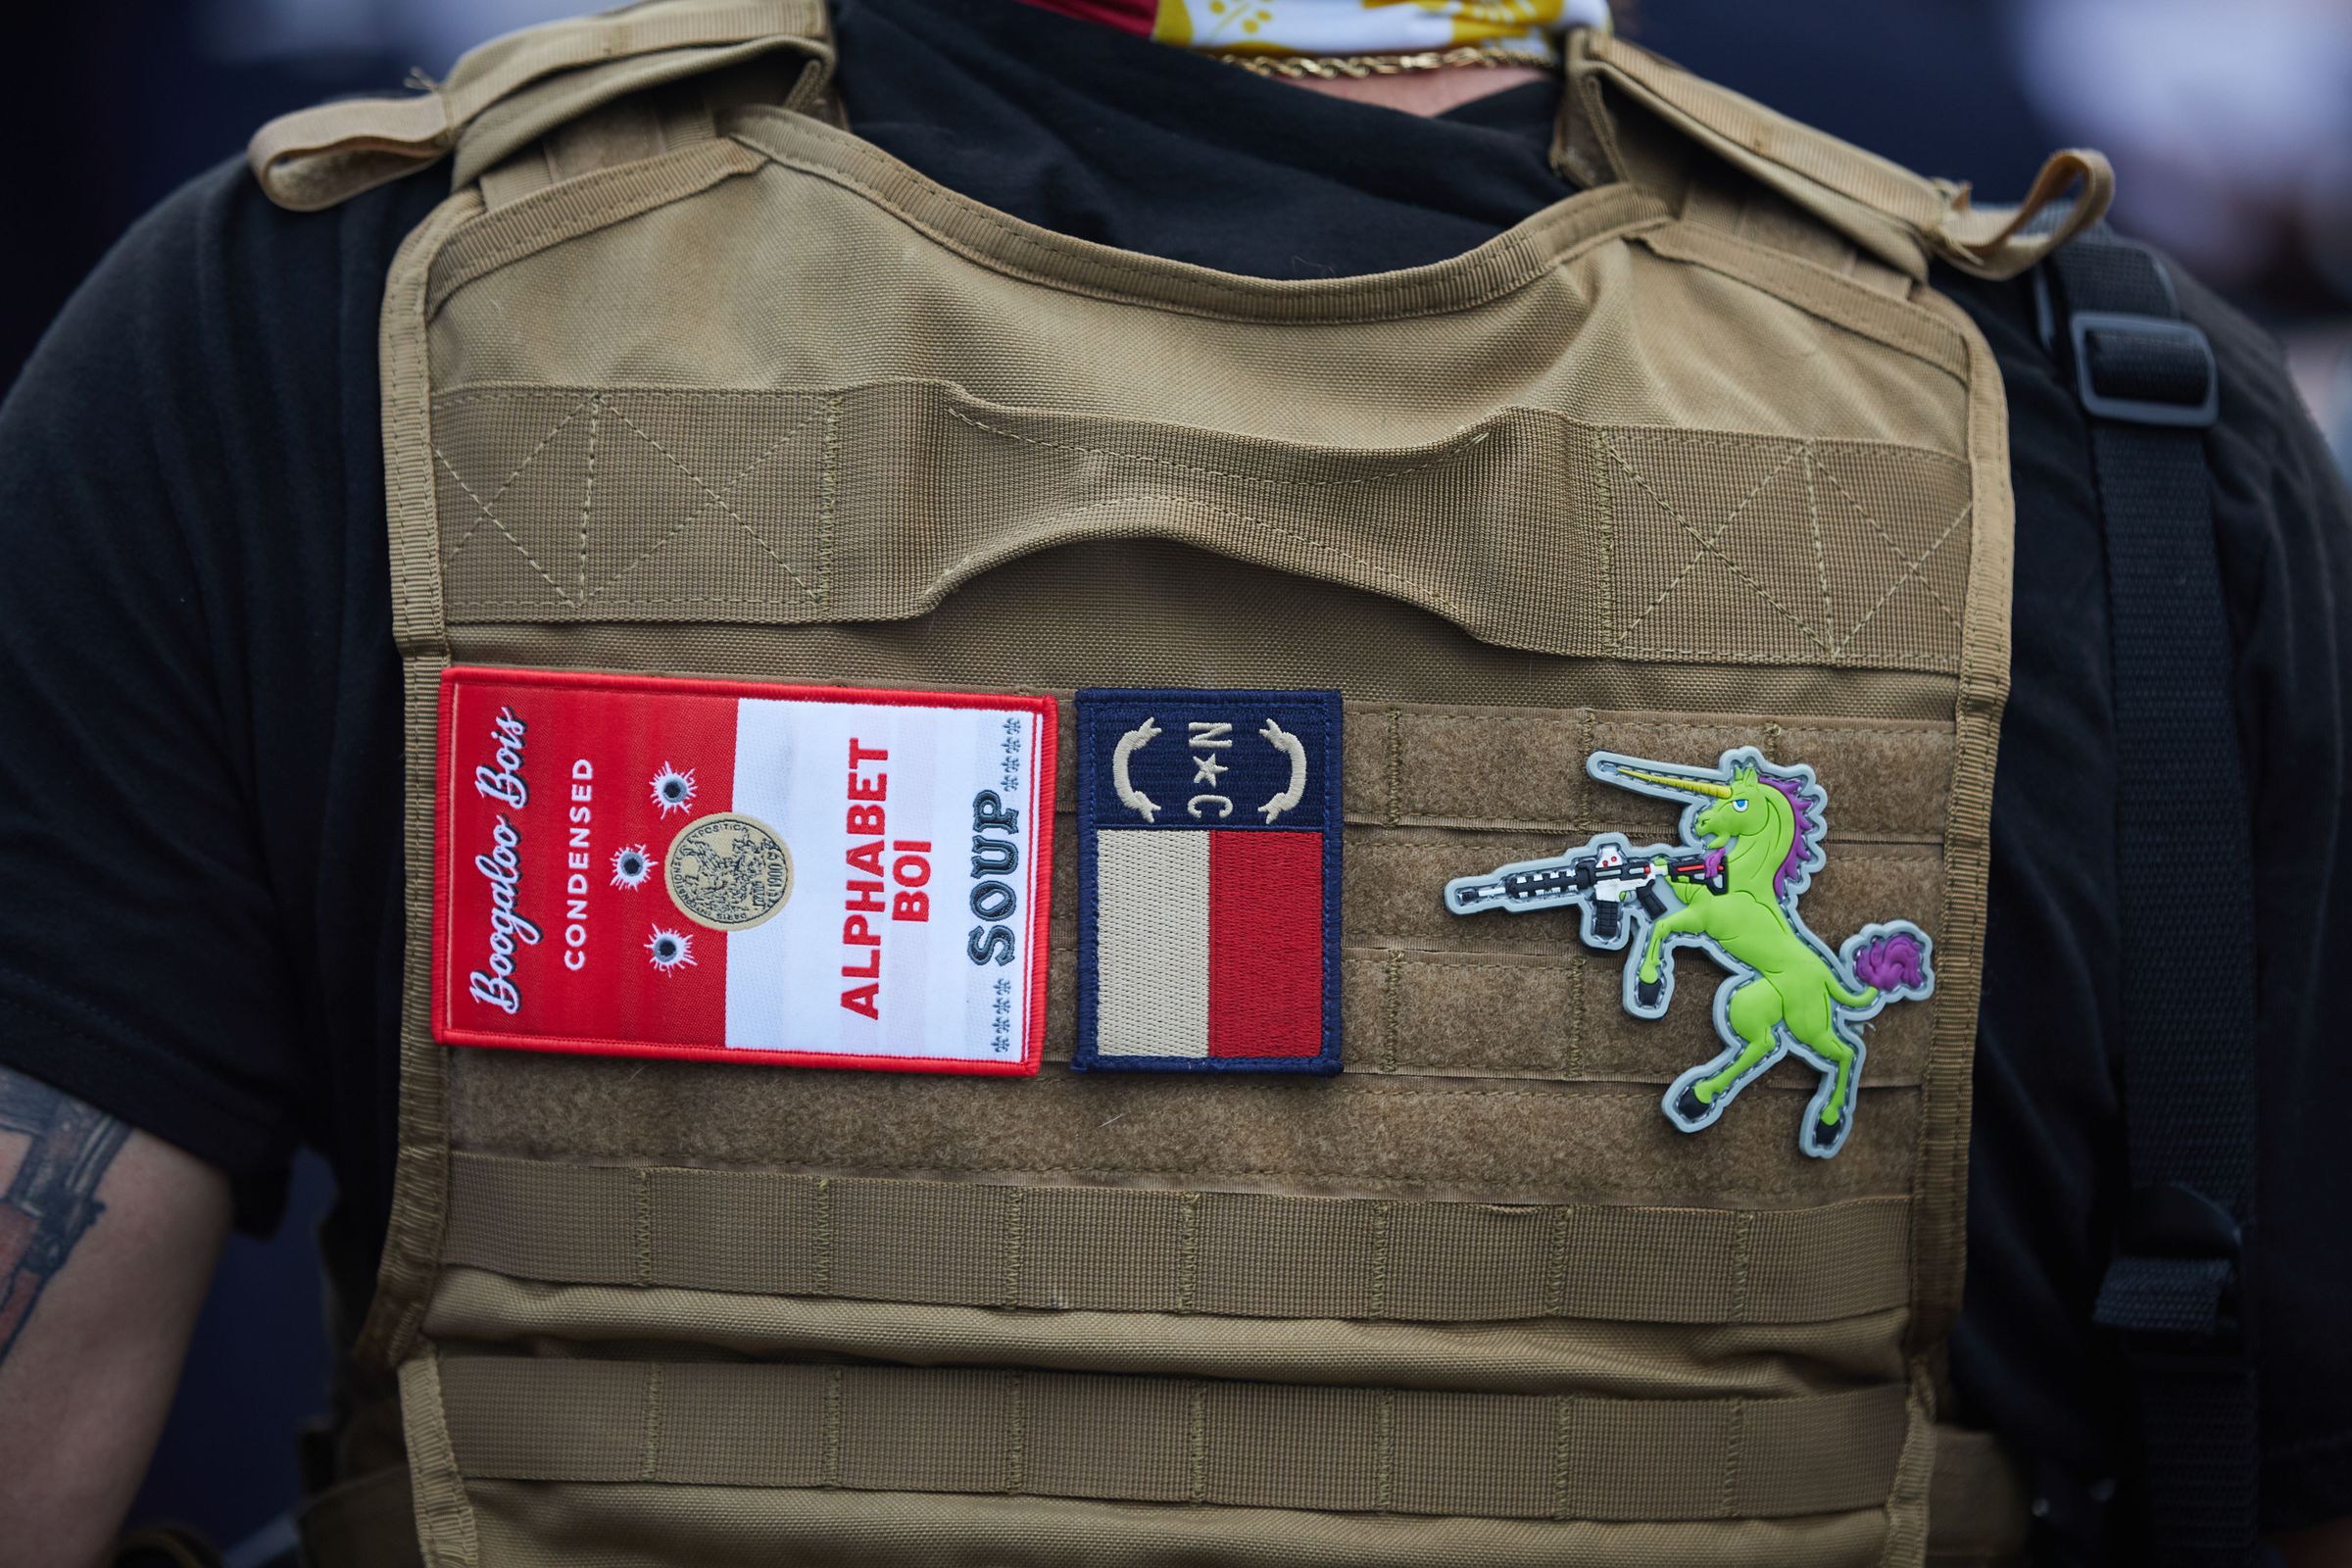 A member of the far-right militia, Boogaloo Bois, walks next to protestors demonstrating outside Charlotte Mecklenburg Police Department Metro Division 2 just outside of downtown Charlotte, North Carolina, on May 29, 2020